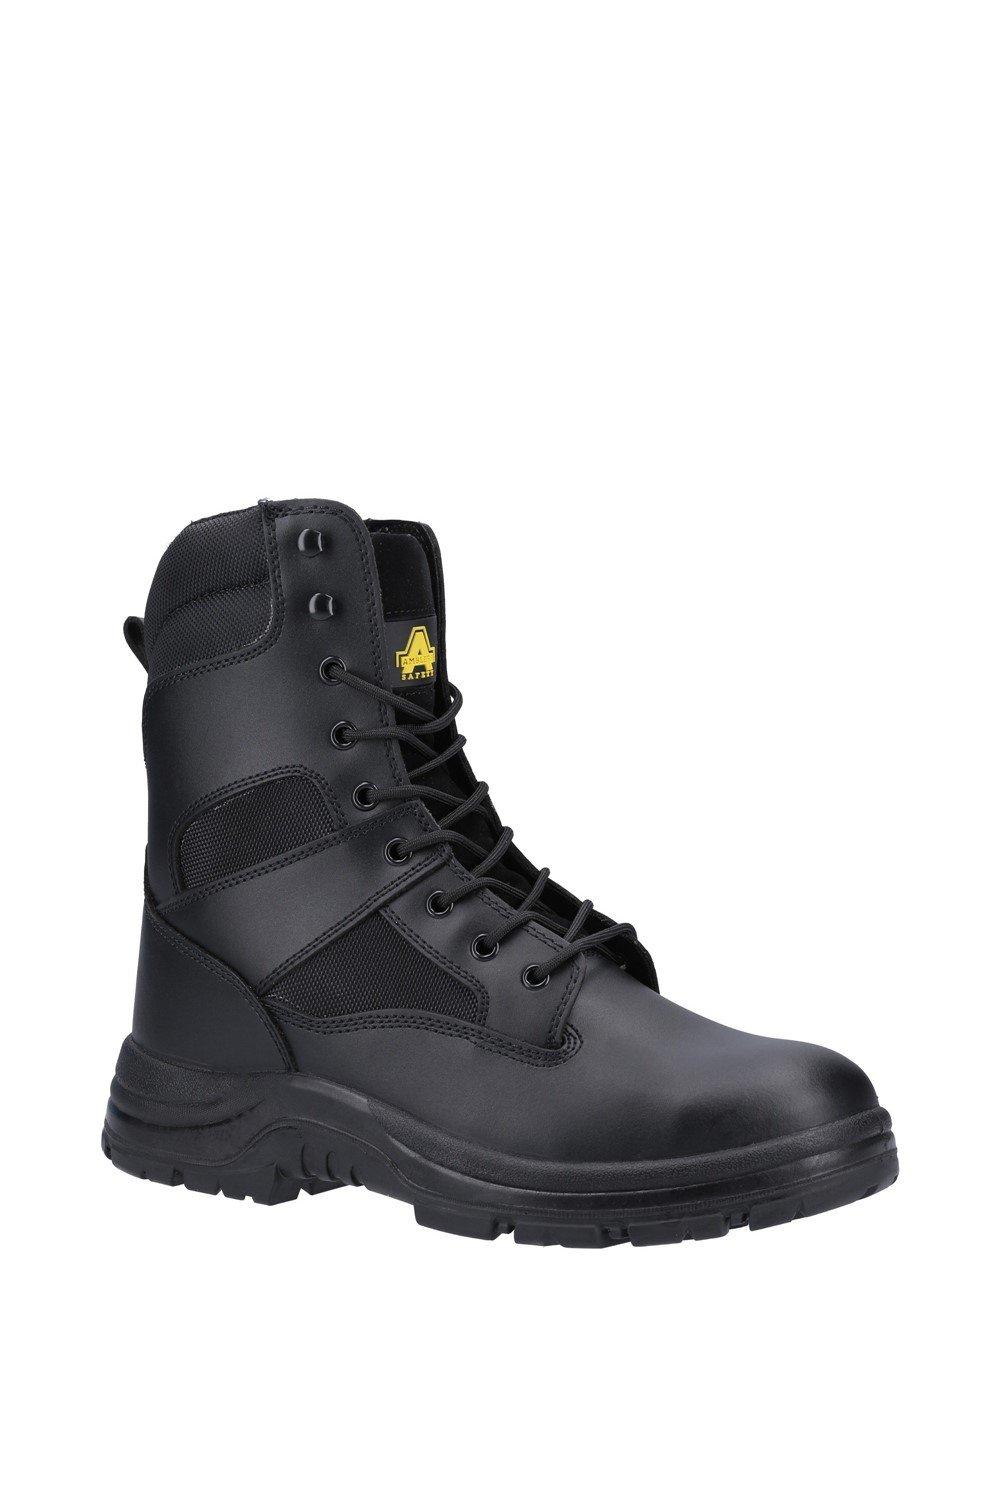 'FS008' Safety Boots